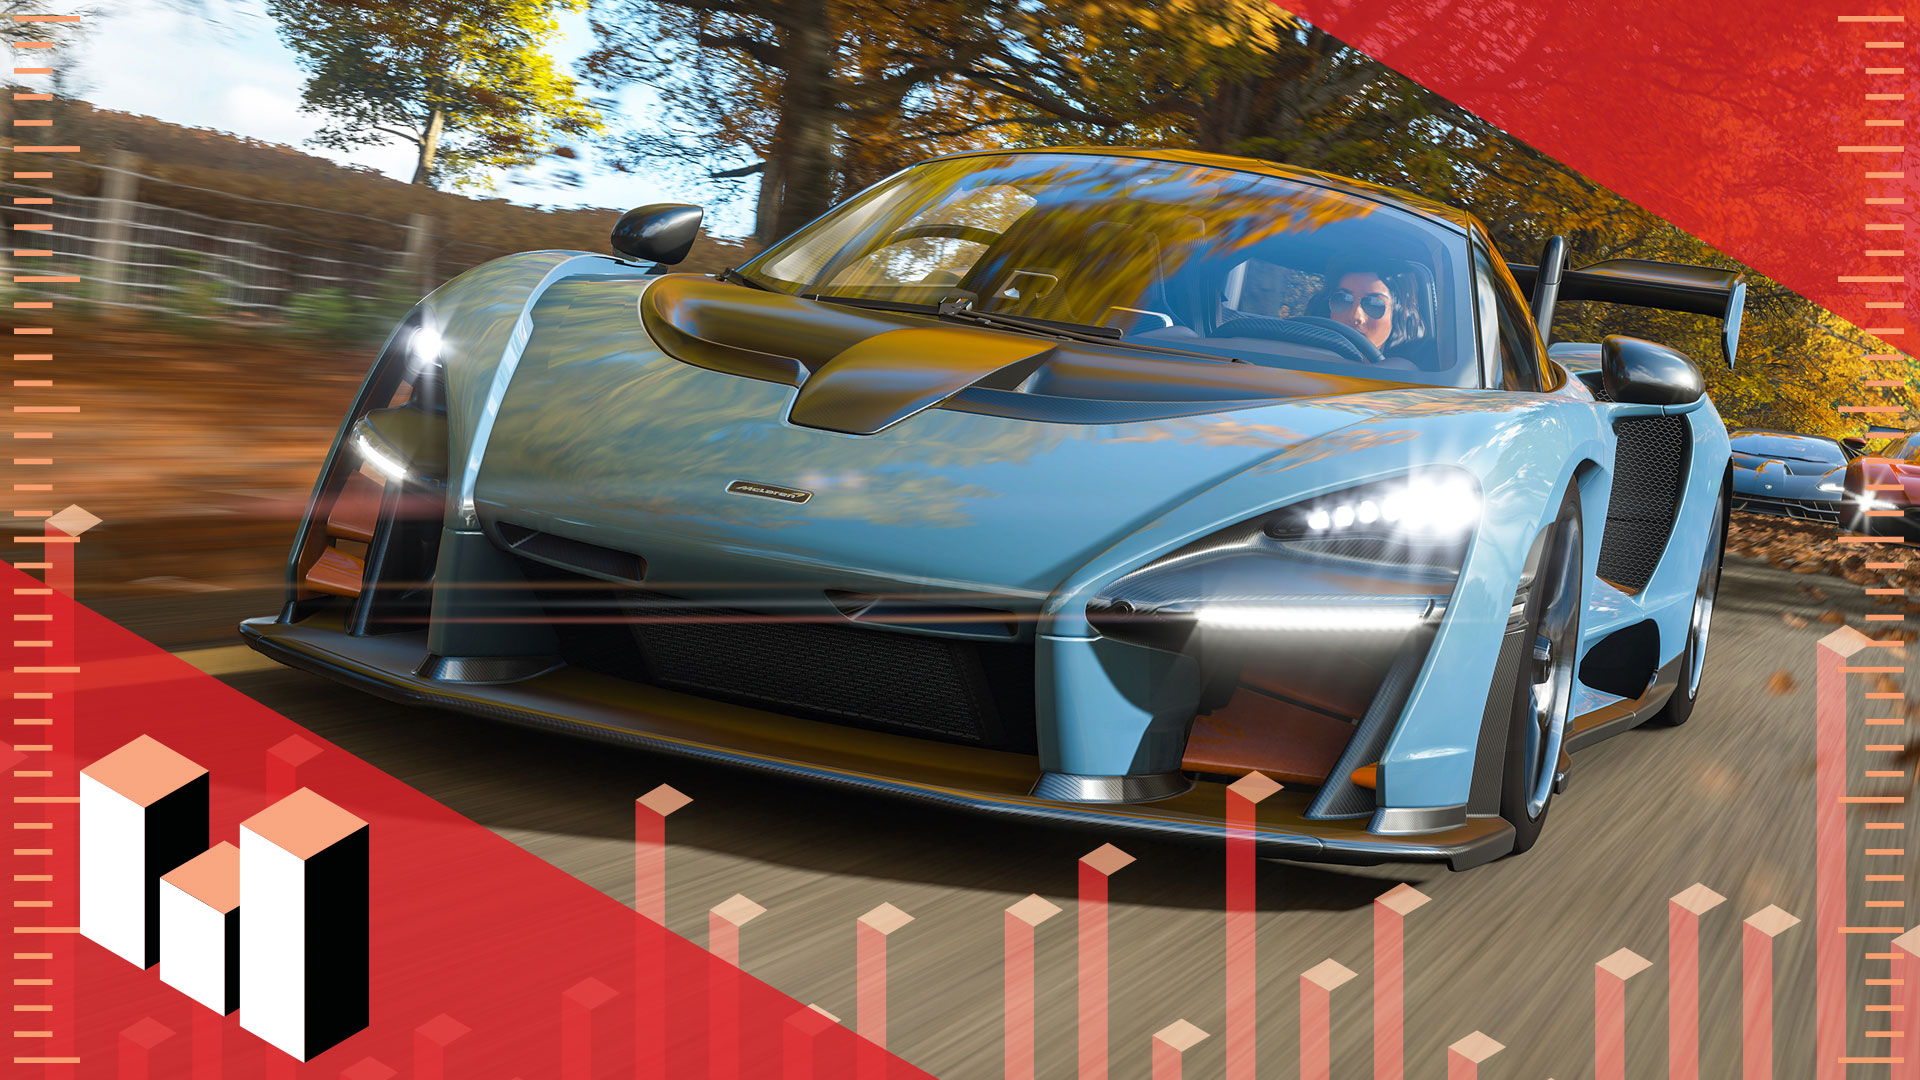 Forza Horizon 4's system requirements are the same as Forza Horizon 3's